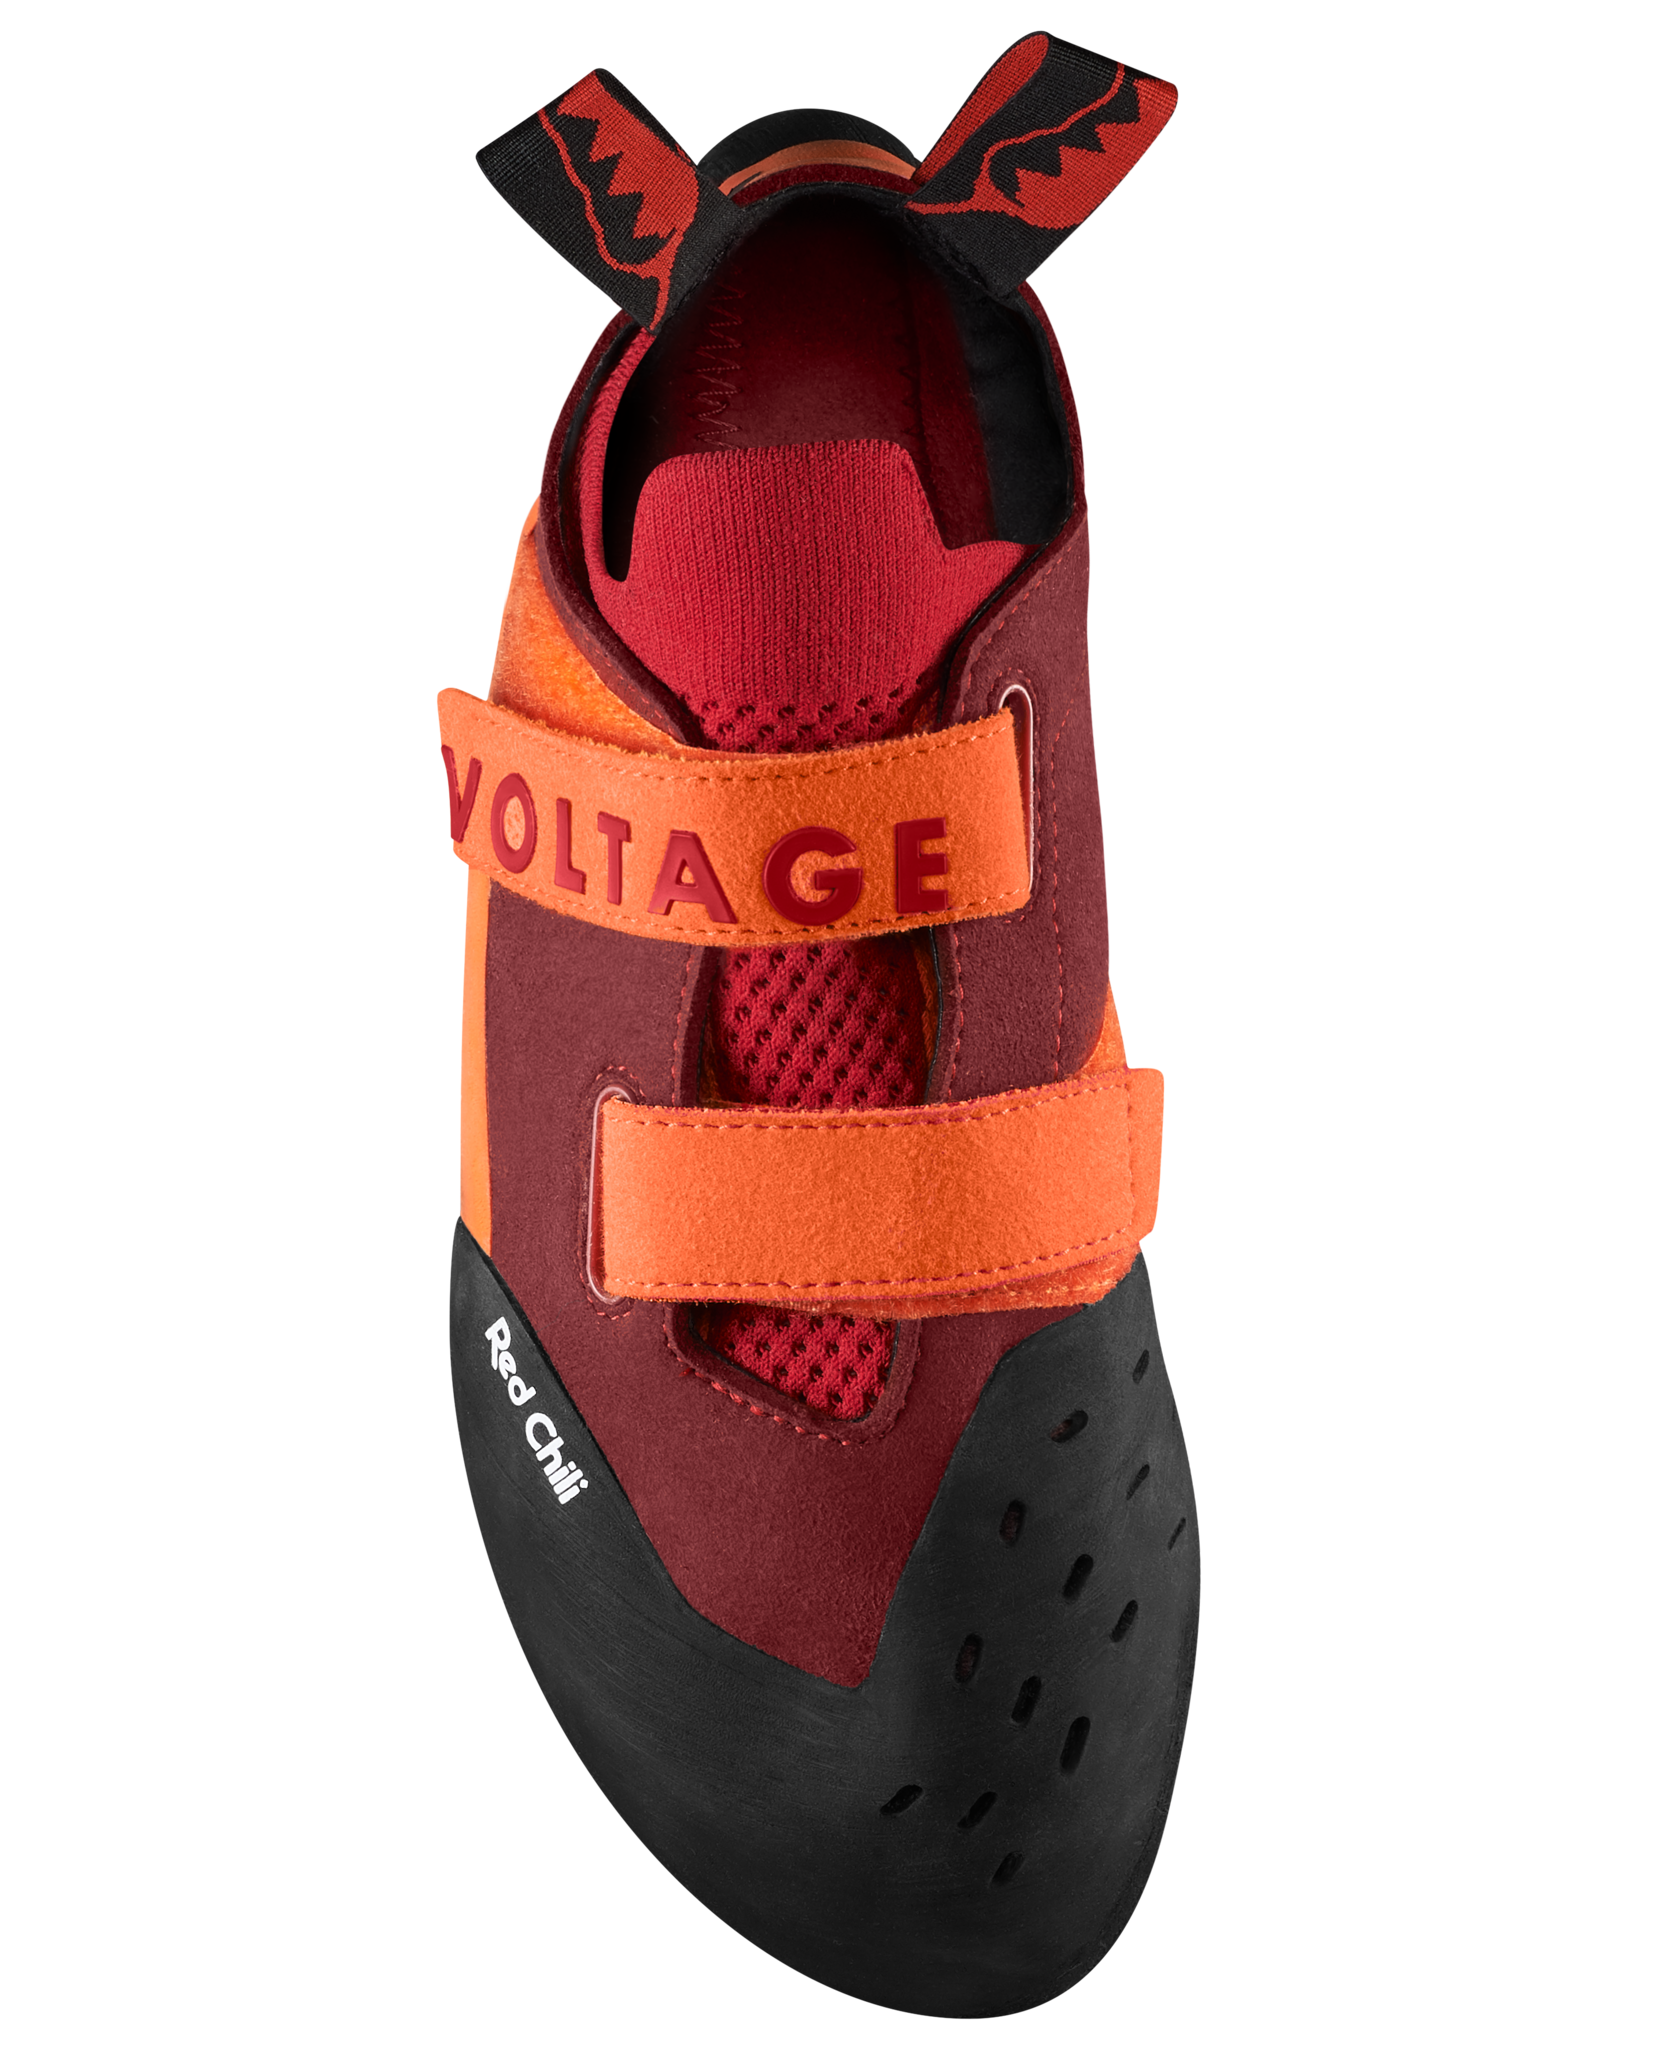  Red Chili Voltage II Climbing Shoe - Red 7.5